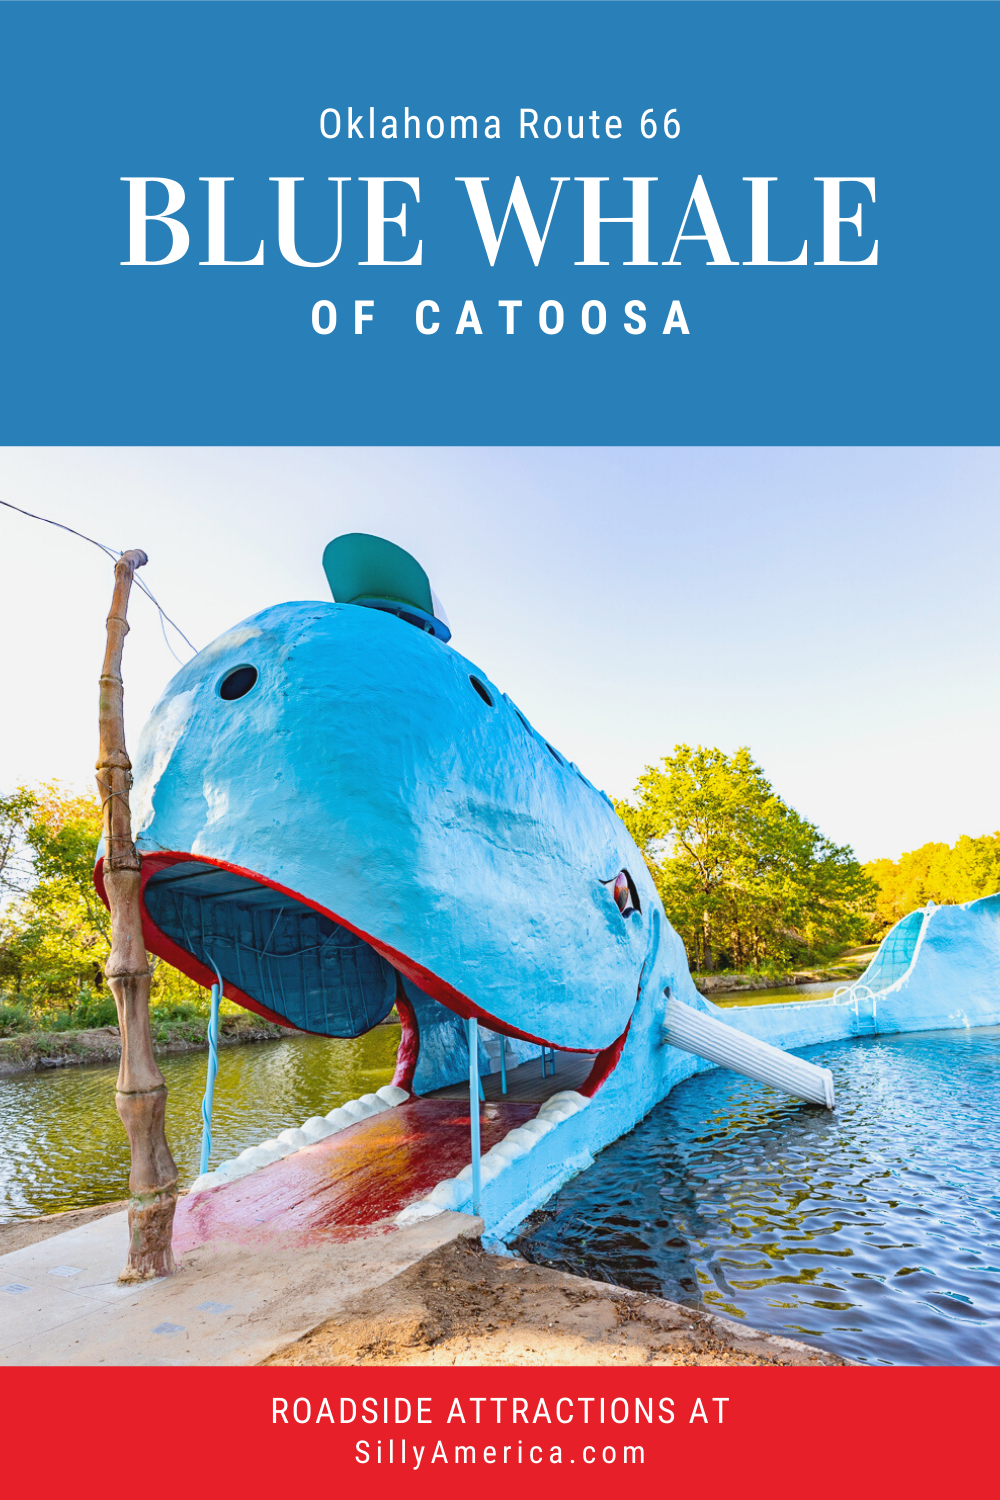 It’s big, it’s blue, and it's an icon of Route 66. The Blue Whale of Catoosa in Oklahoma has been making a splash since the 1970s. Visit this weird roadside attraction on a Route 66 road trip or Oklahoma vacation. It's a must see road trip stop for your travel itinerary and bucket list.  #RoadTrips #RoadTripStop #Route66 #Route66RoadTrip #OklahomaRoute66 #Oklahoma #OklahomaRoadTrip #OklahomaRoadsideAttractions #RoadsideAttractions #RoadsideAttraction #RoadsideAmerica #RoadTrip